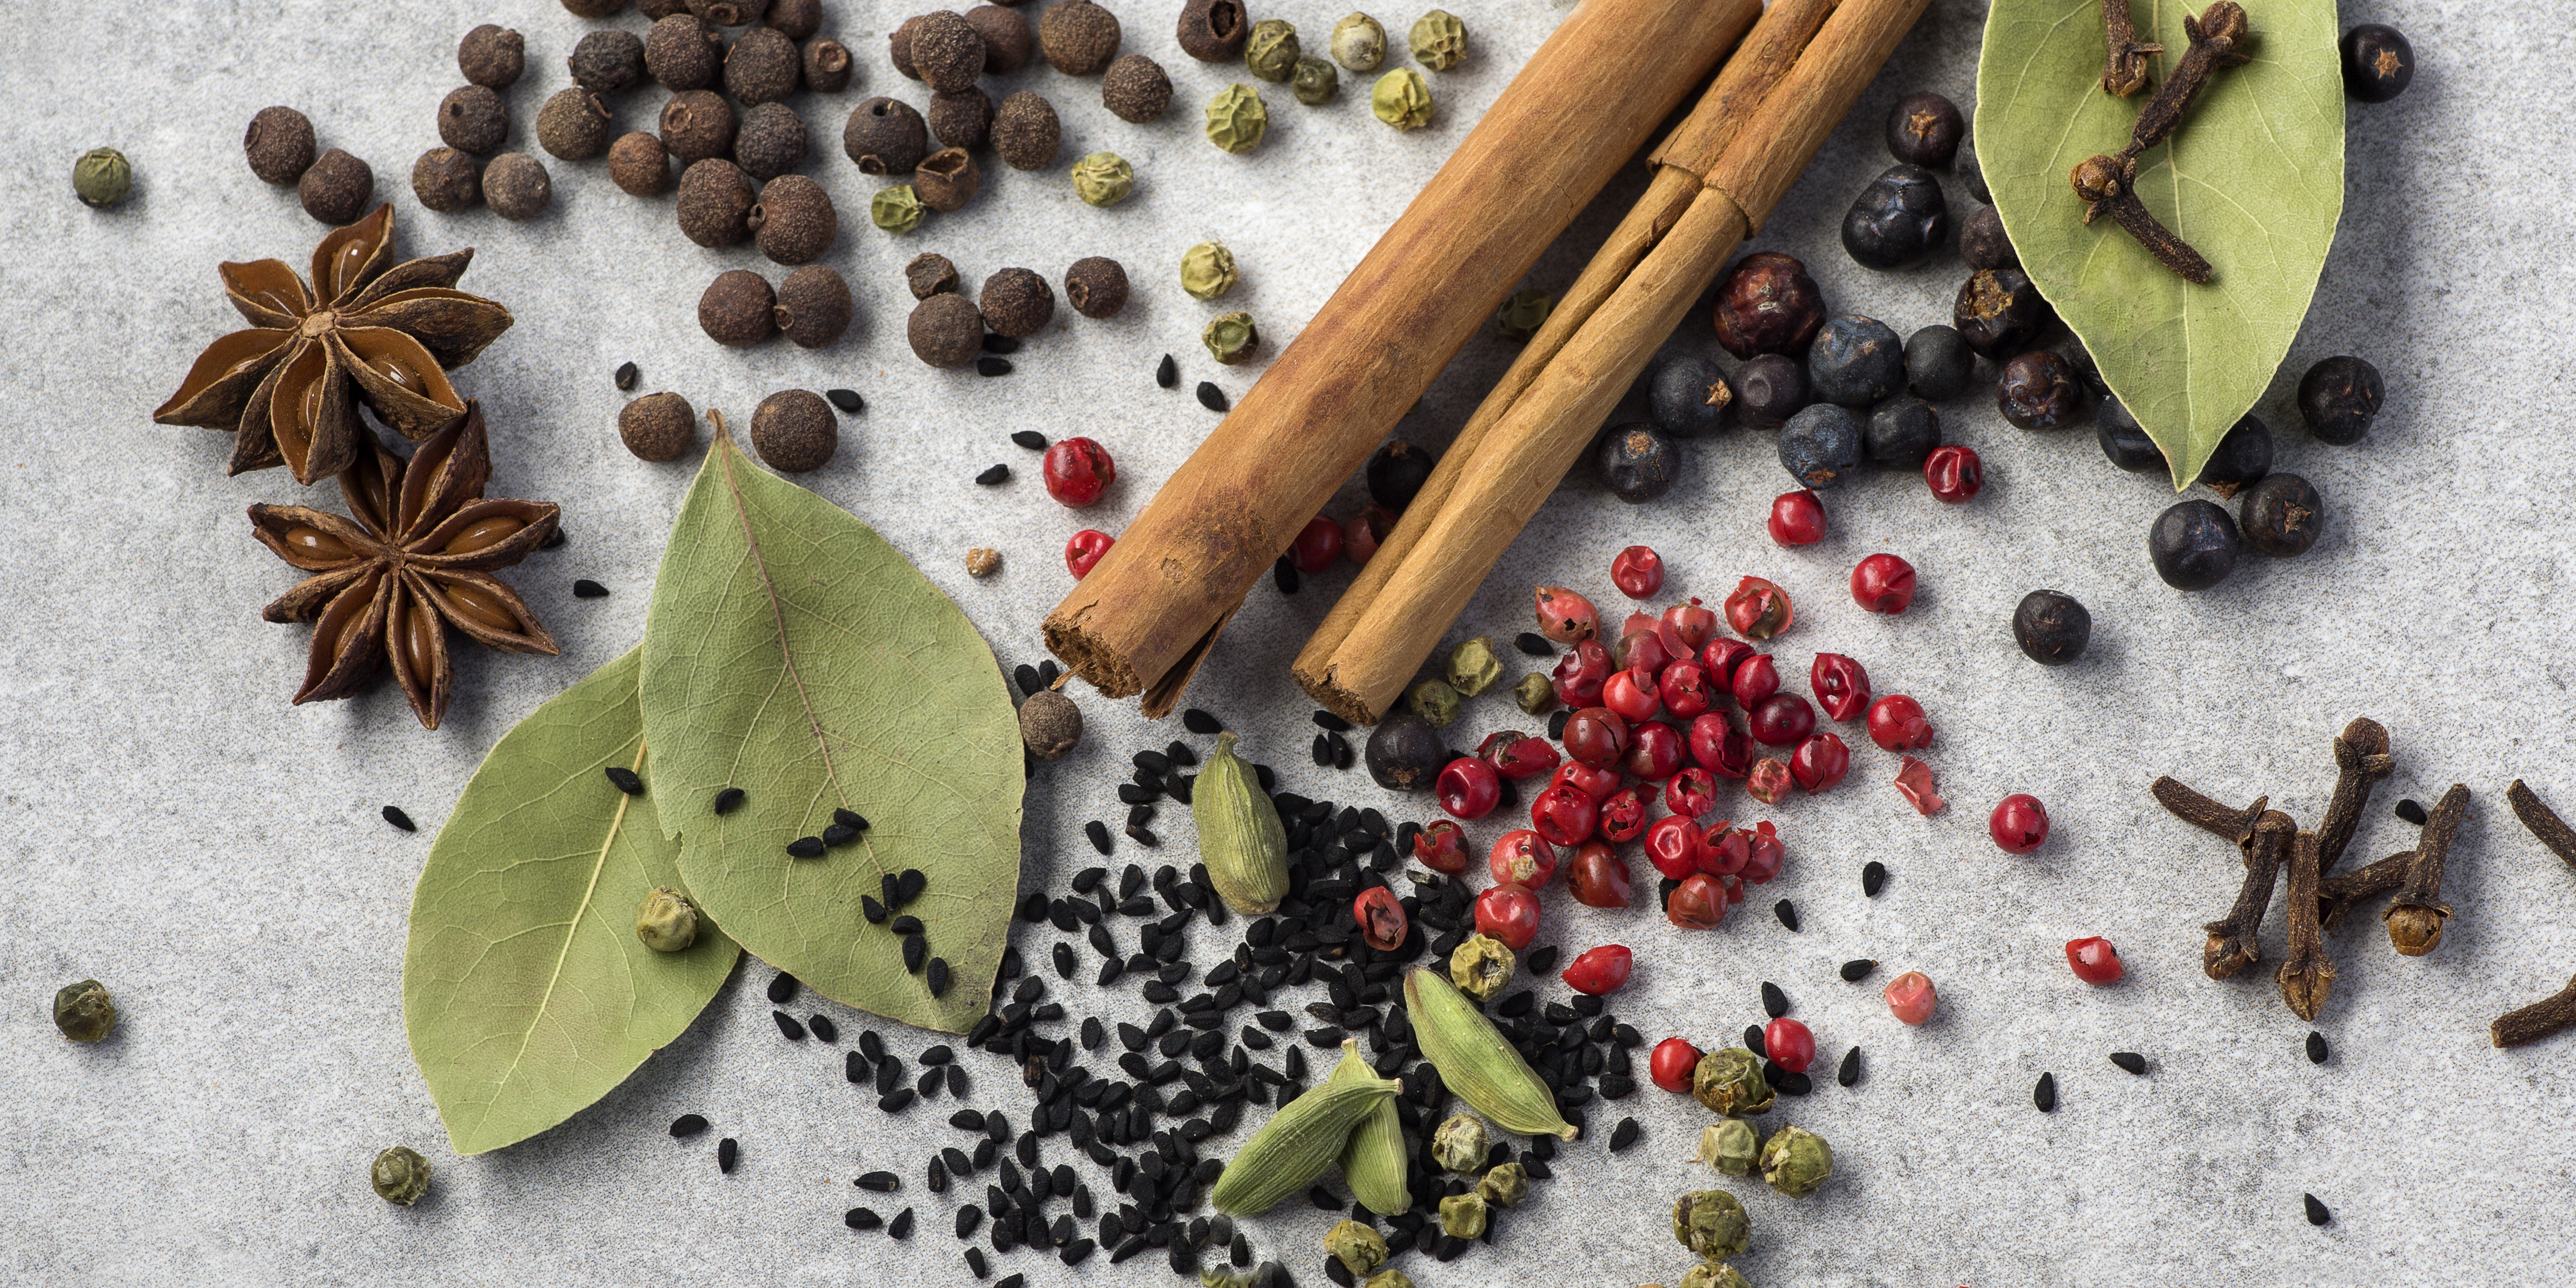 Spices and herbs from A-Z